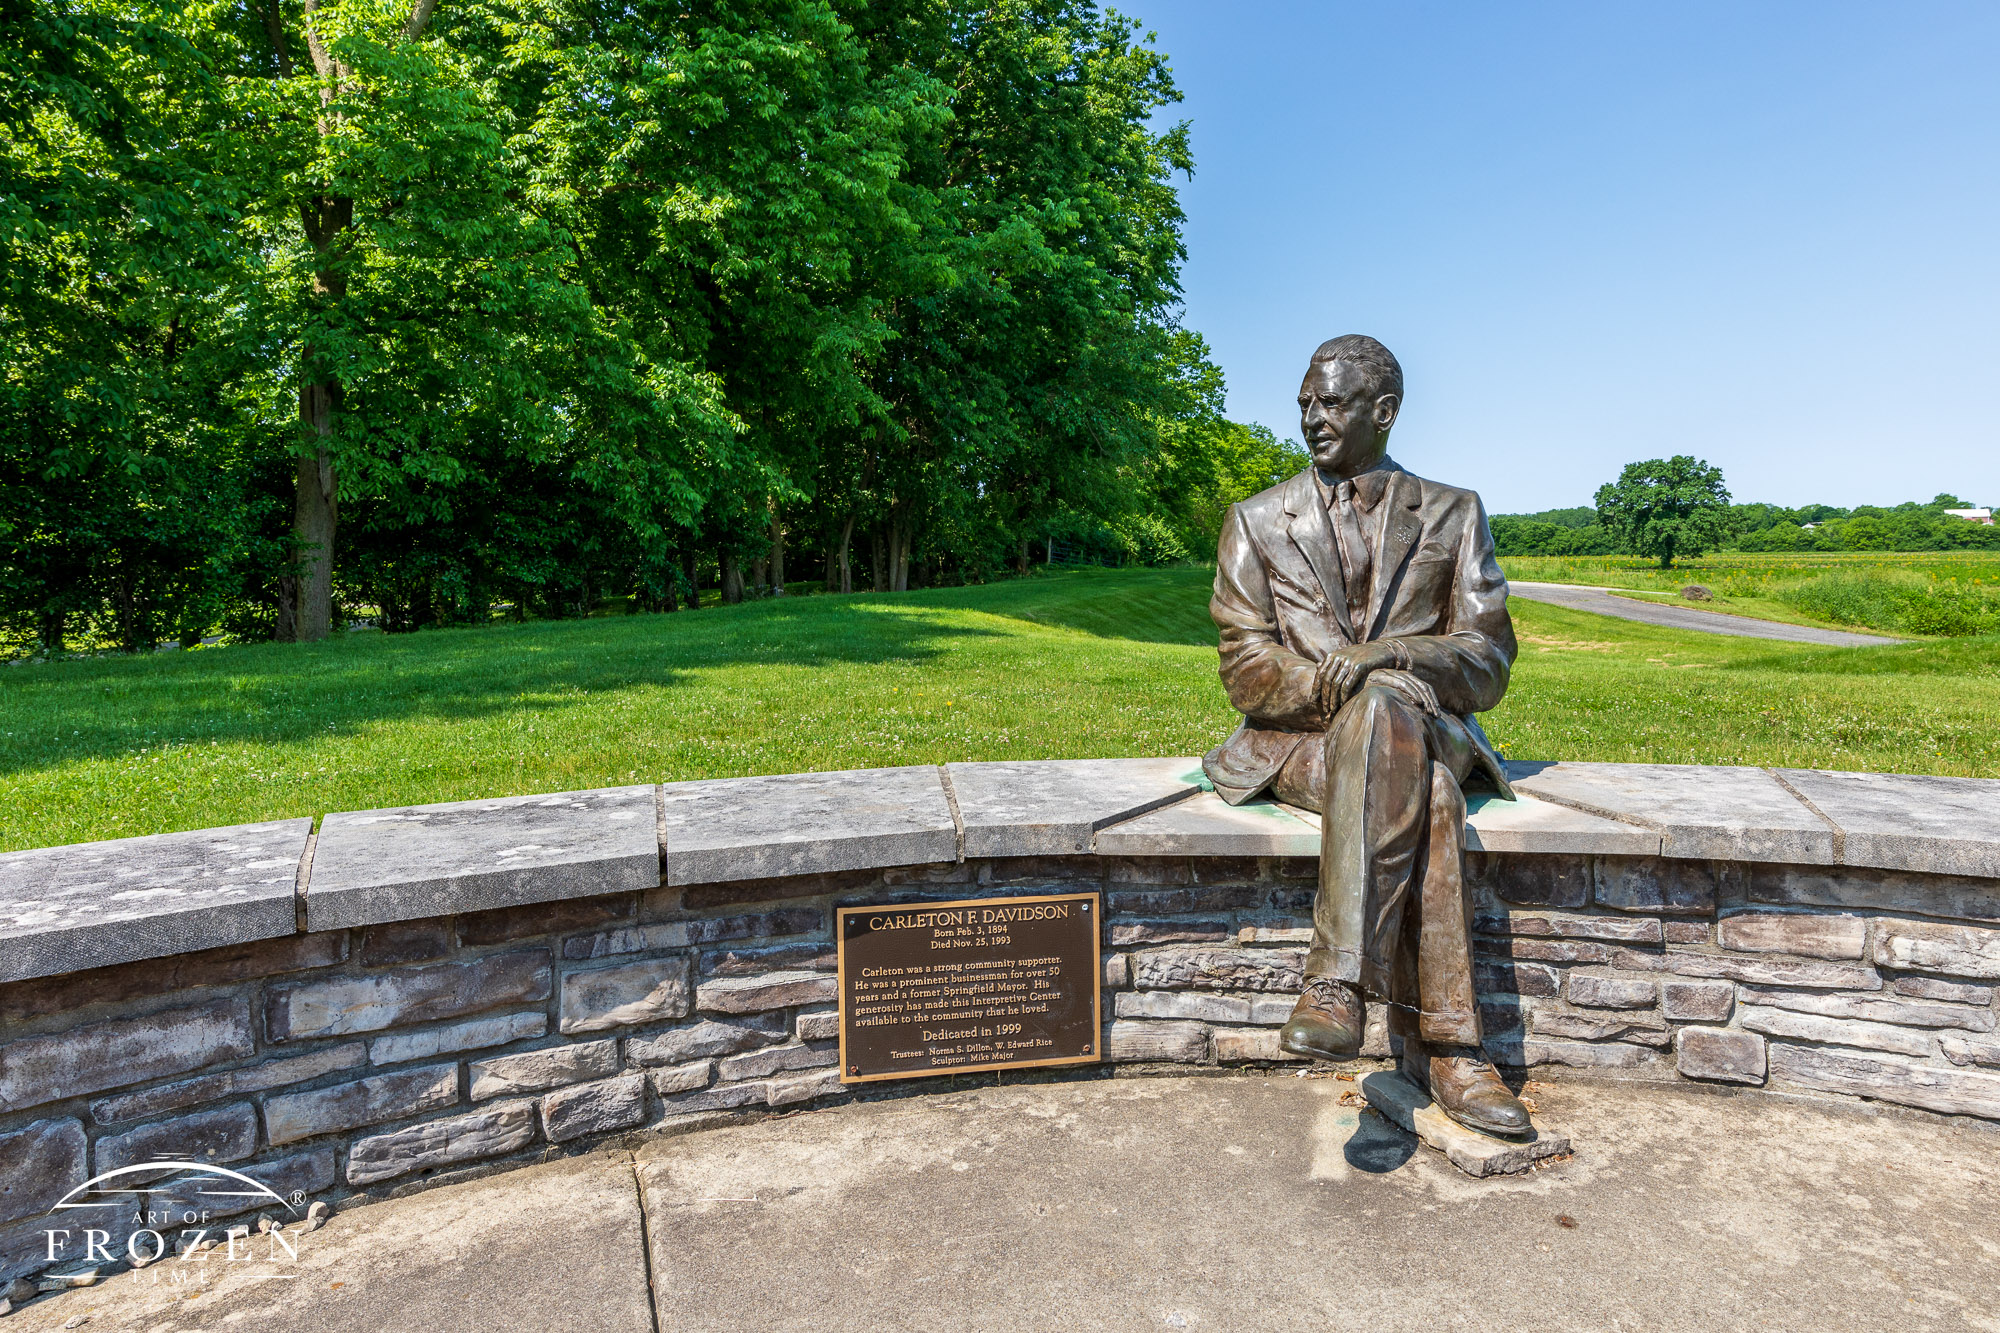 A bronze sculpture of Carleton F. Davidson sitting on a small wall which recognizes his contributions to Springfield Ohio.